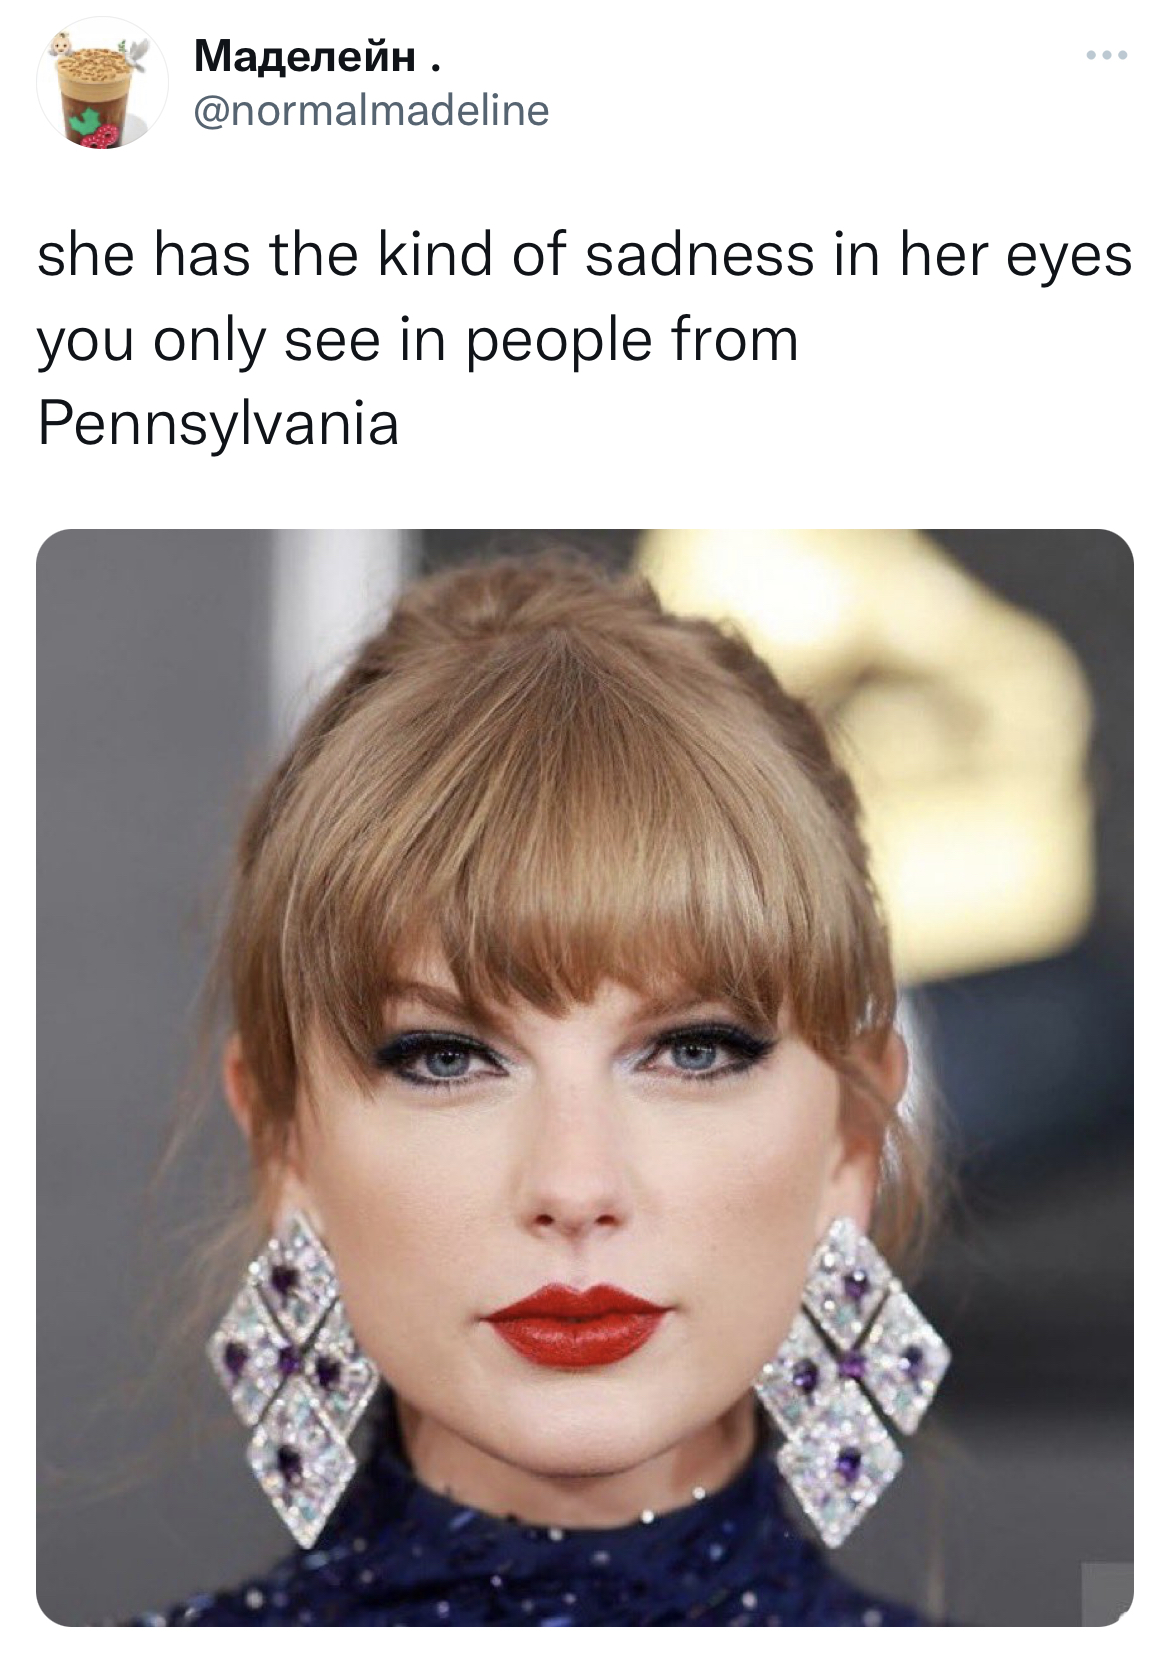 savage and absurd tweets - blond - . she has the kind of sadness in her eyes you only see in people from Pennsylvania